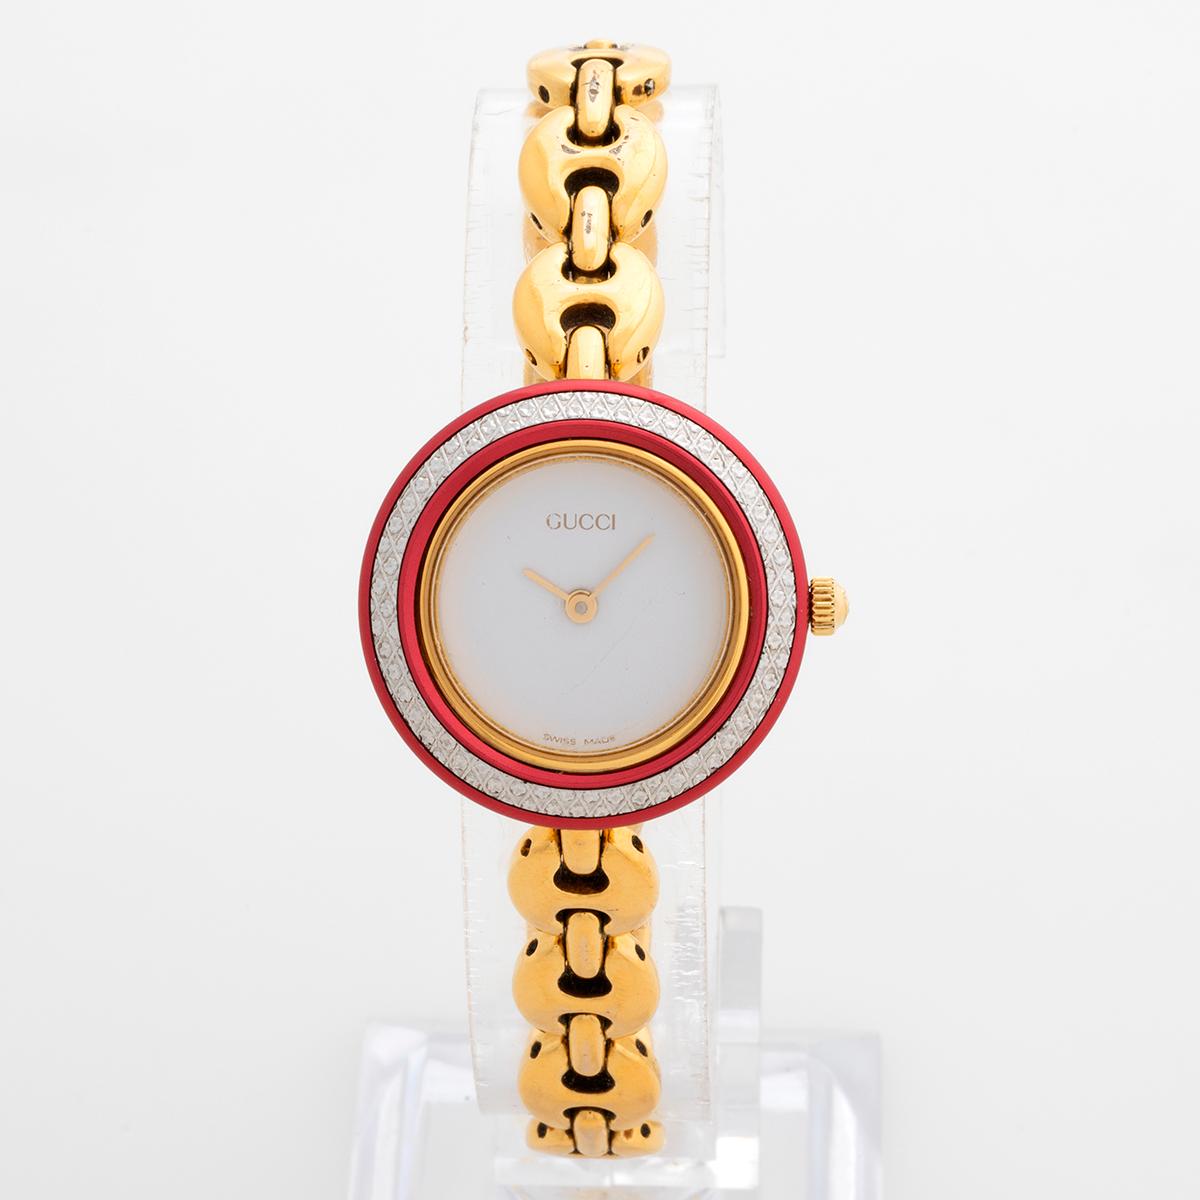 Our neo vintage and iconic Gucci ladies reference 11/12.2 a reference which supersedes the reference first launched as 1200L features a gold plated case and bracelet with interchangeable bezels. One of the most popular Gucci watches in period is